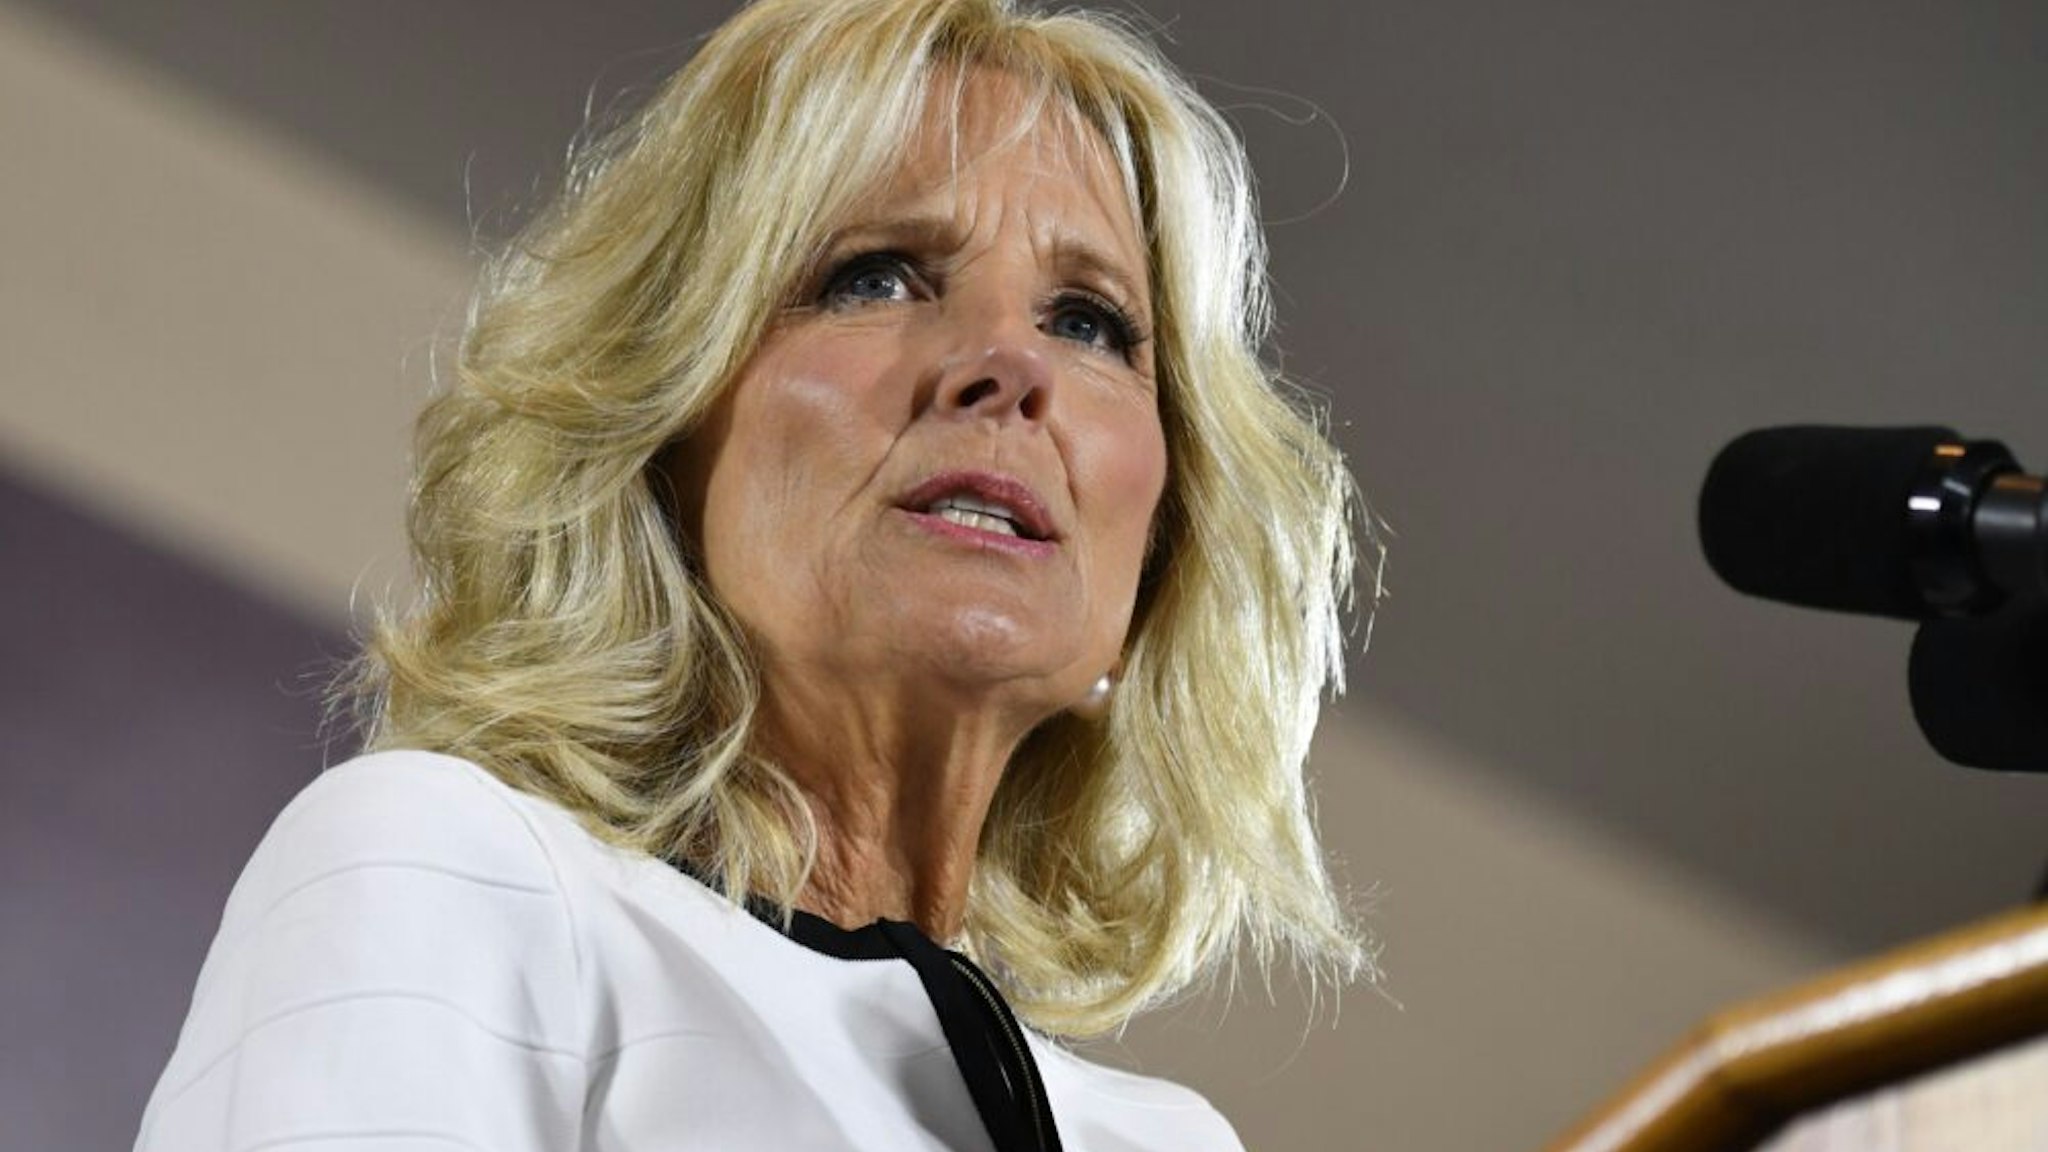 Jill Biden, wife of former US vice president Joe Biden, speaks during her husband's first campaign event as a candidate for US President at Teamsters Local 249 in Pittsburgh, Pennsylvania, April 29, 2019.